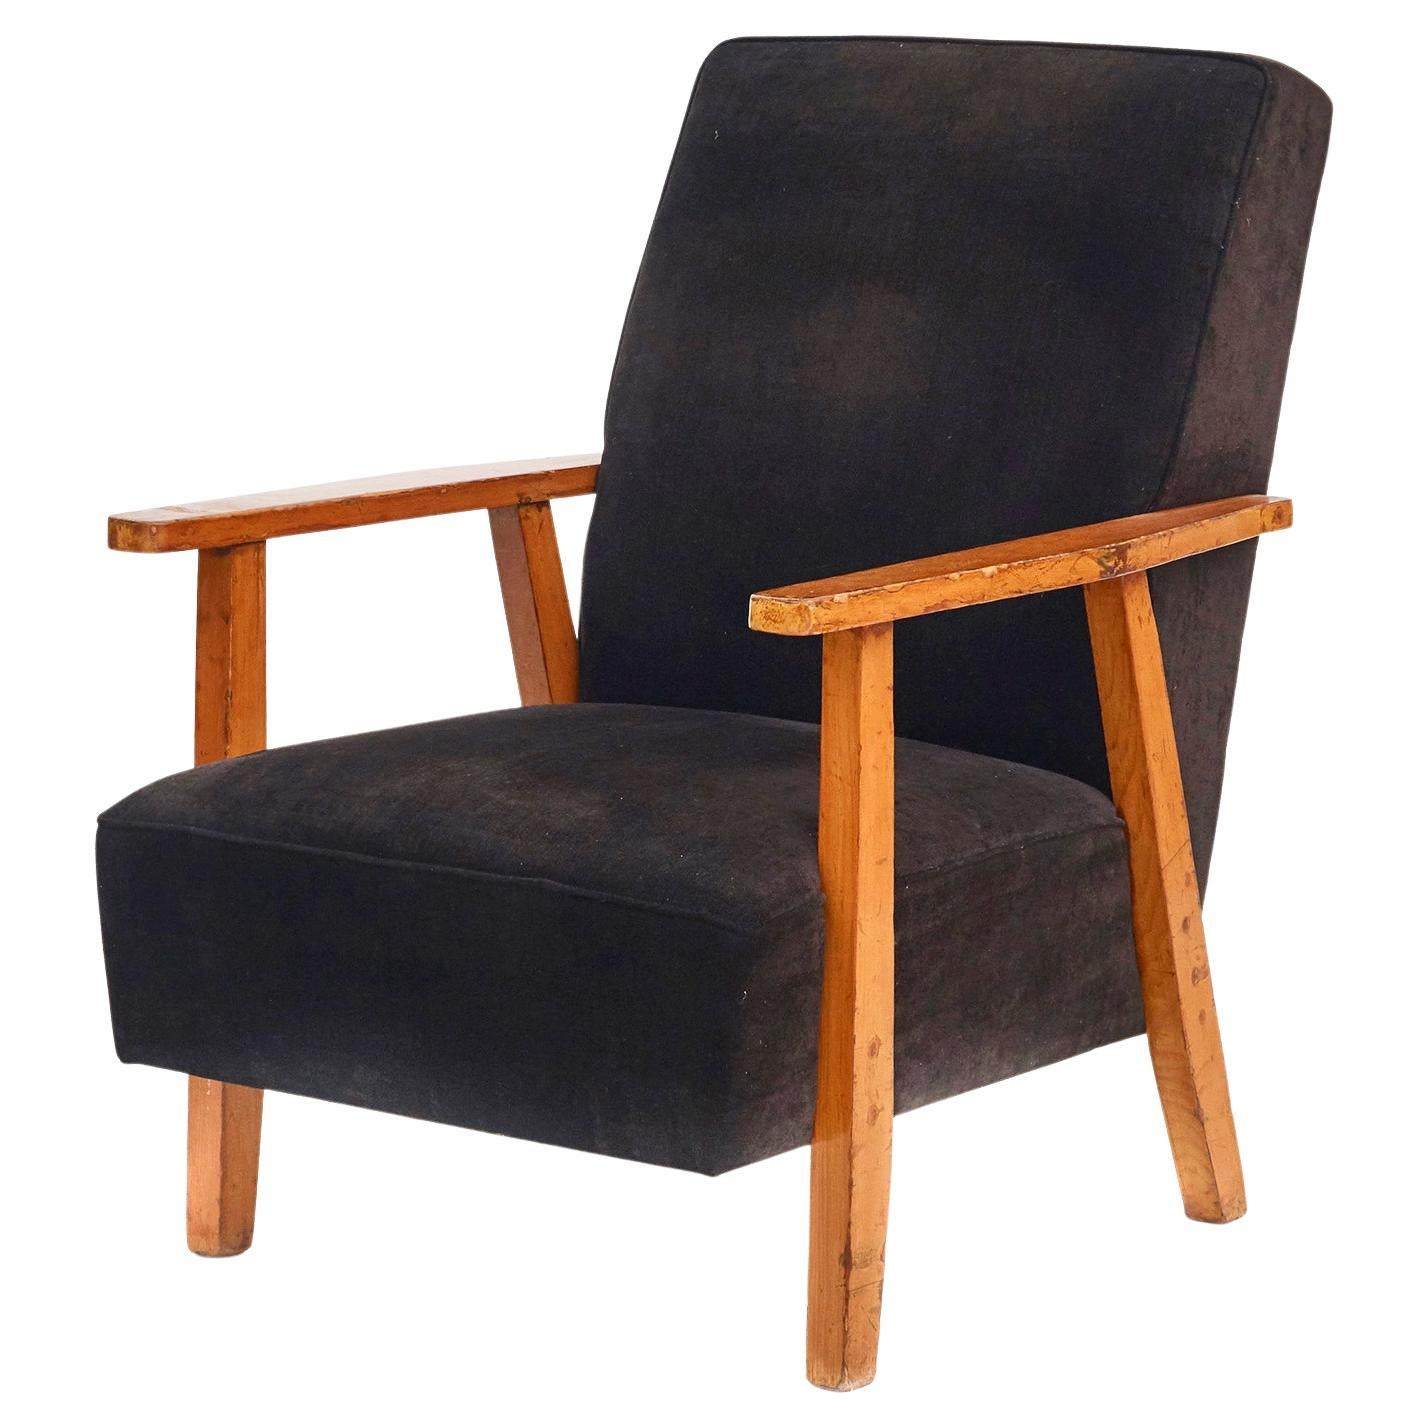 "Art and craft" Armchair / Easy Chairs For Sale